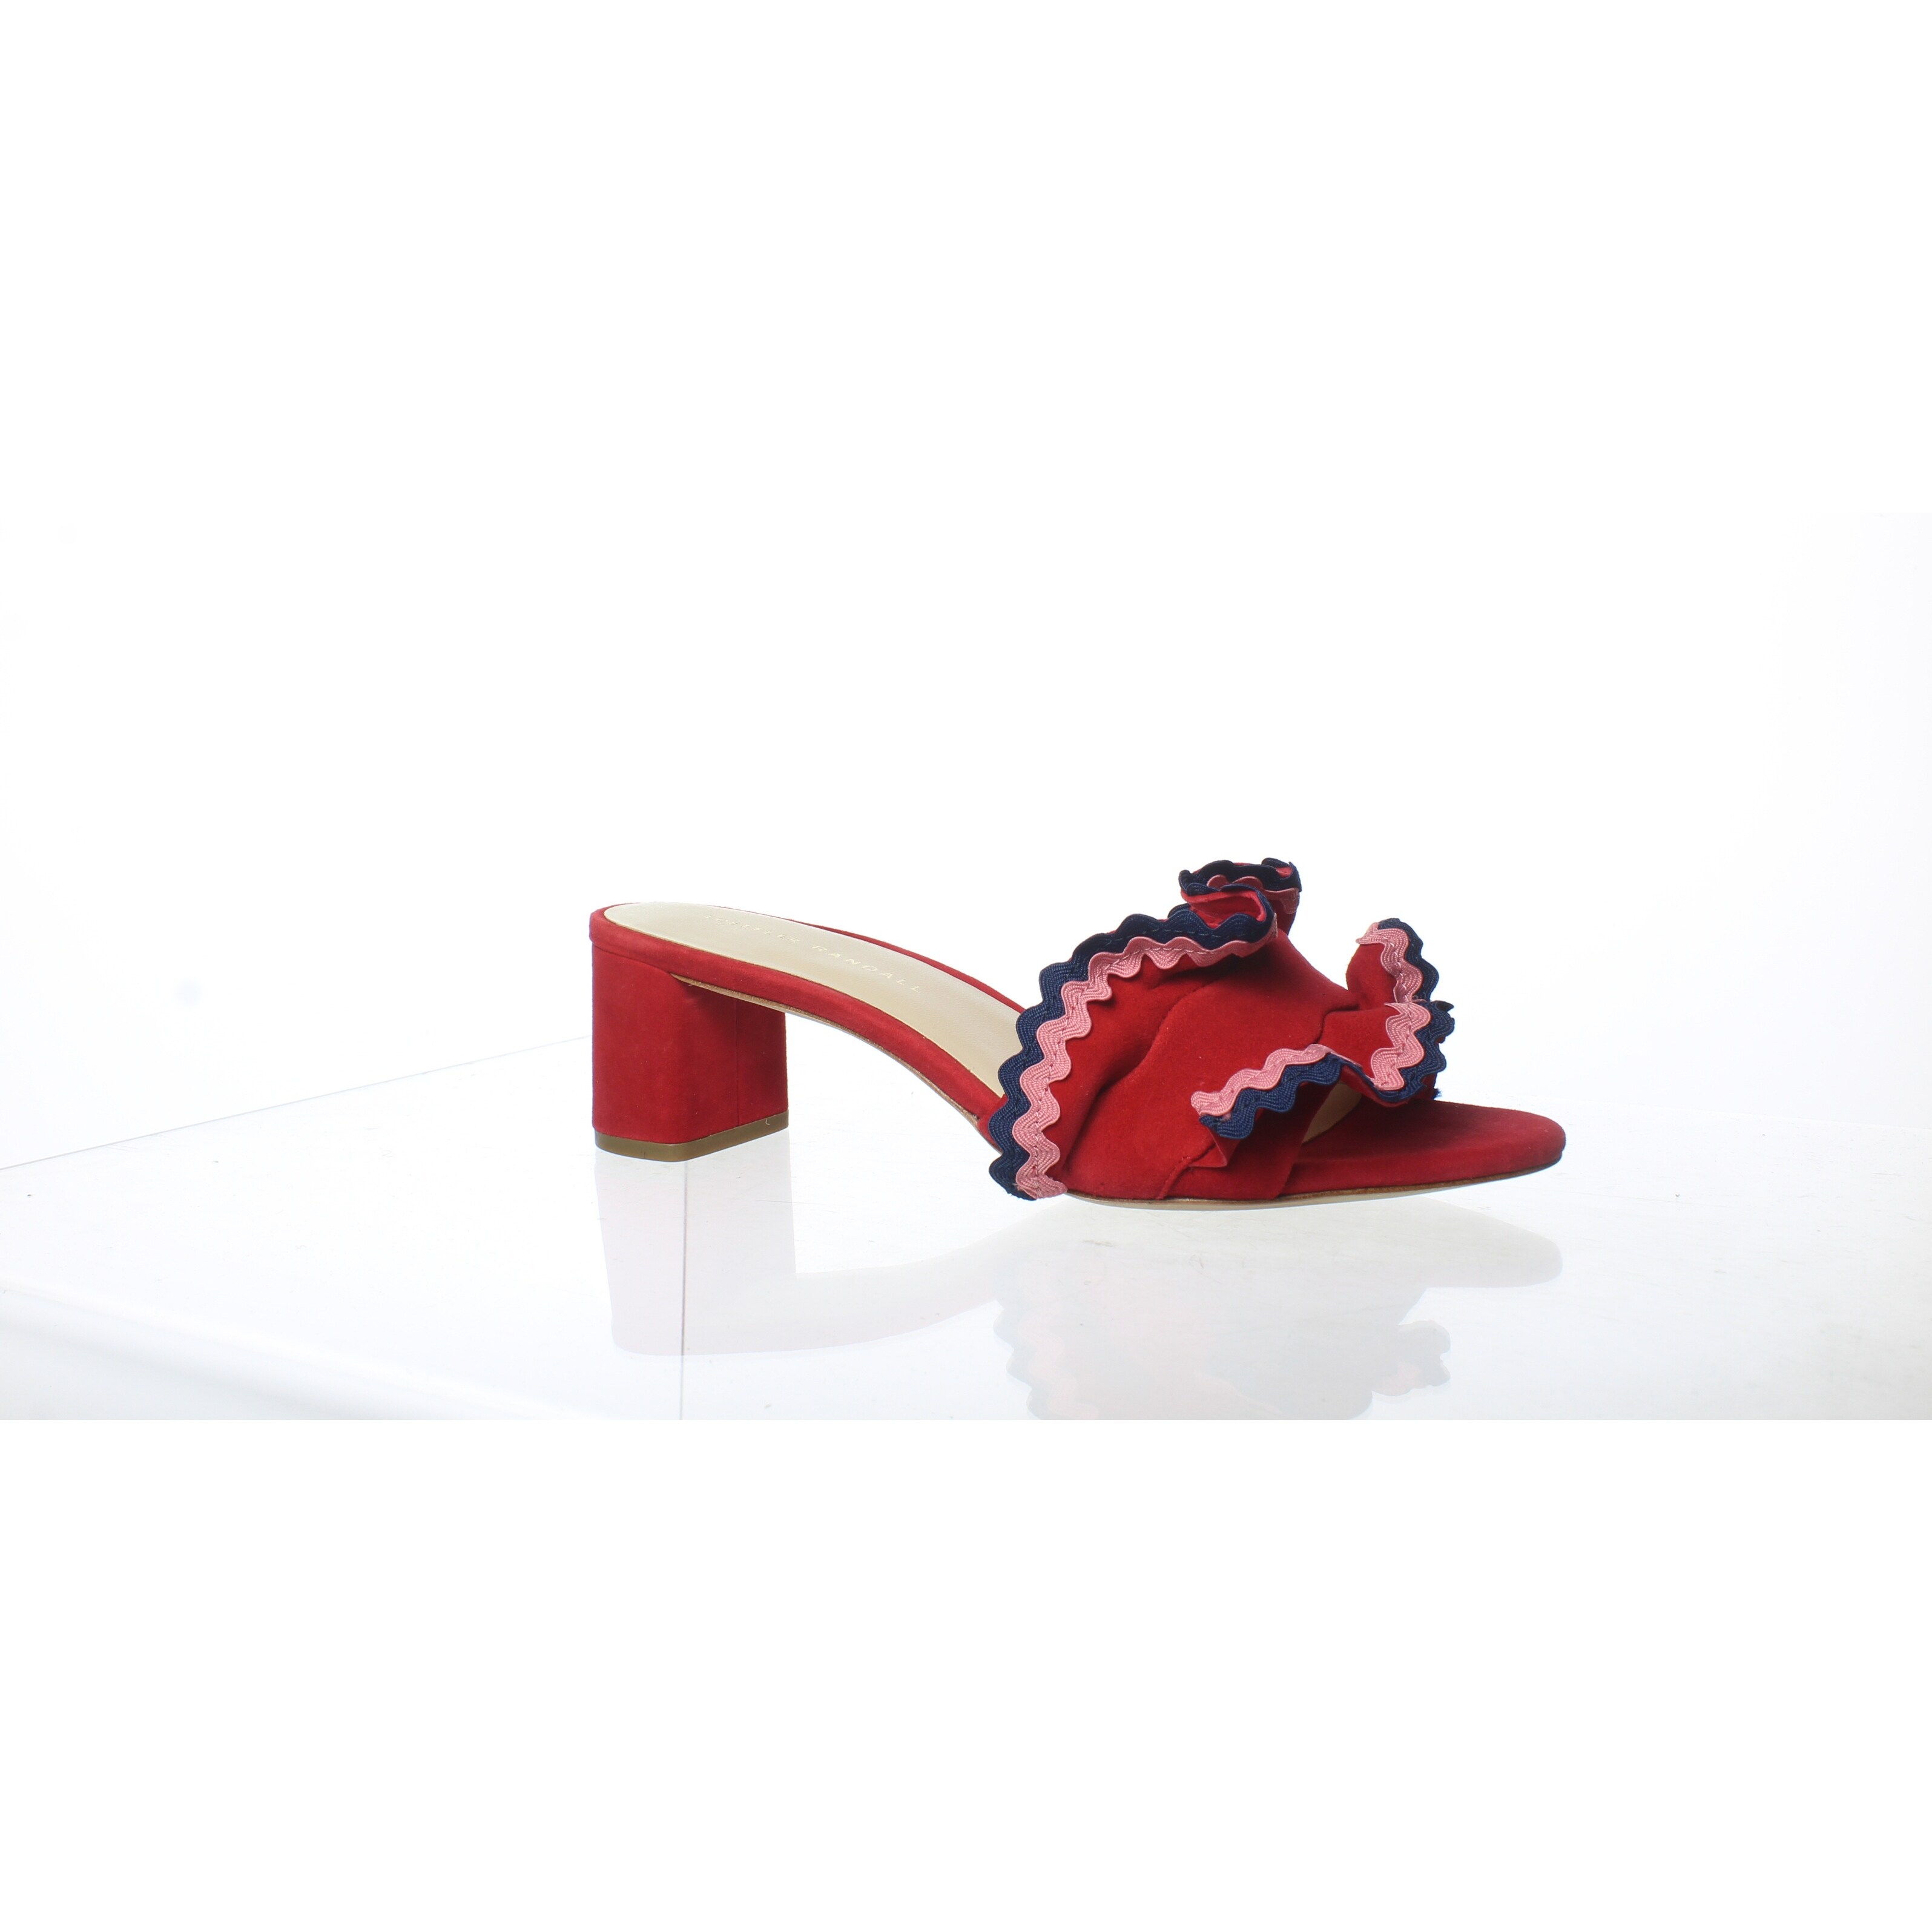 red sandals size 5